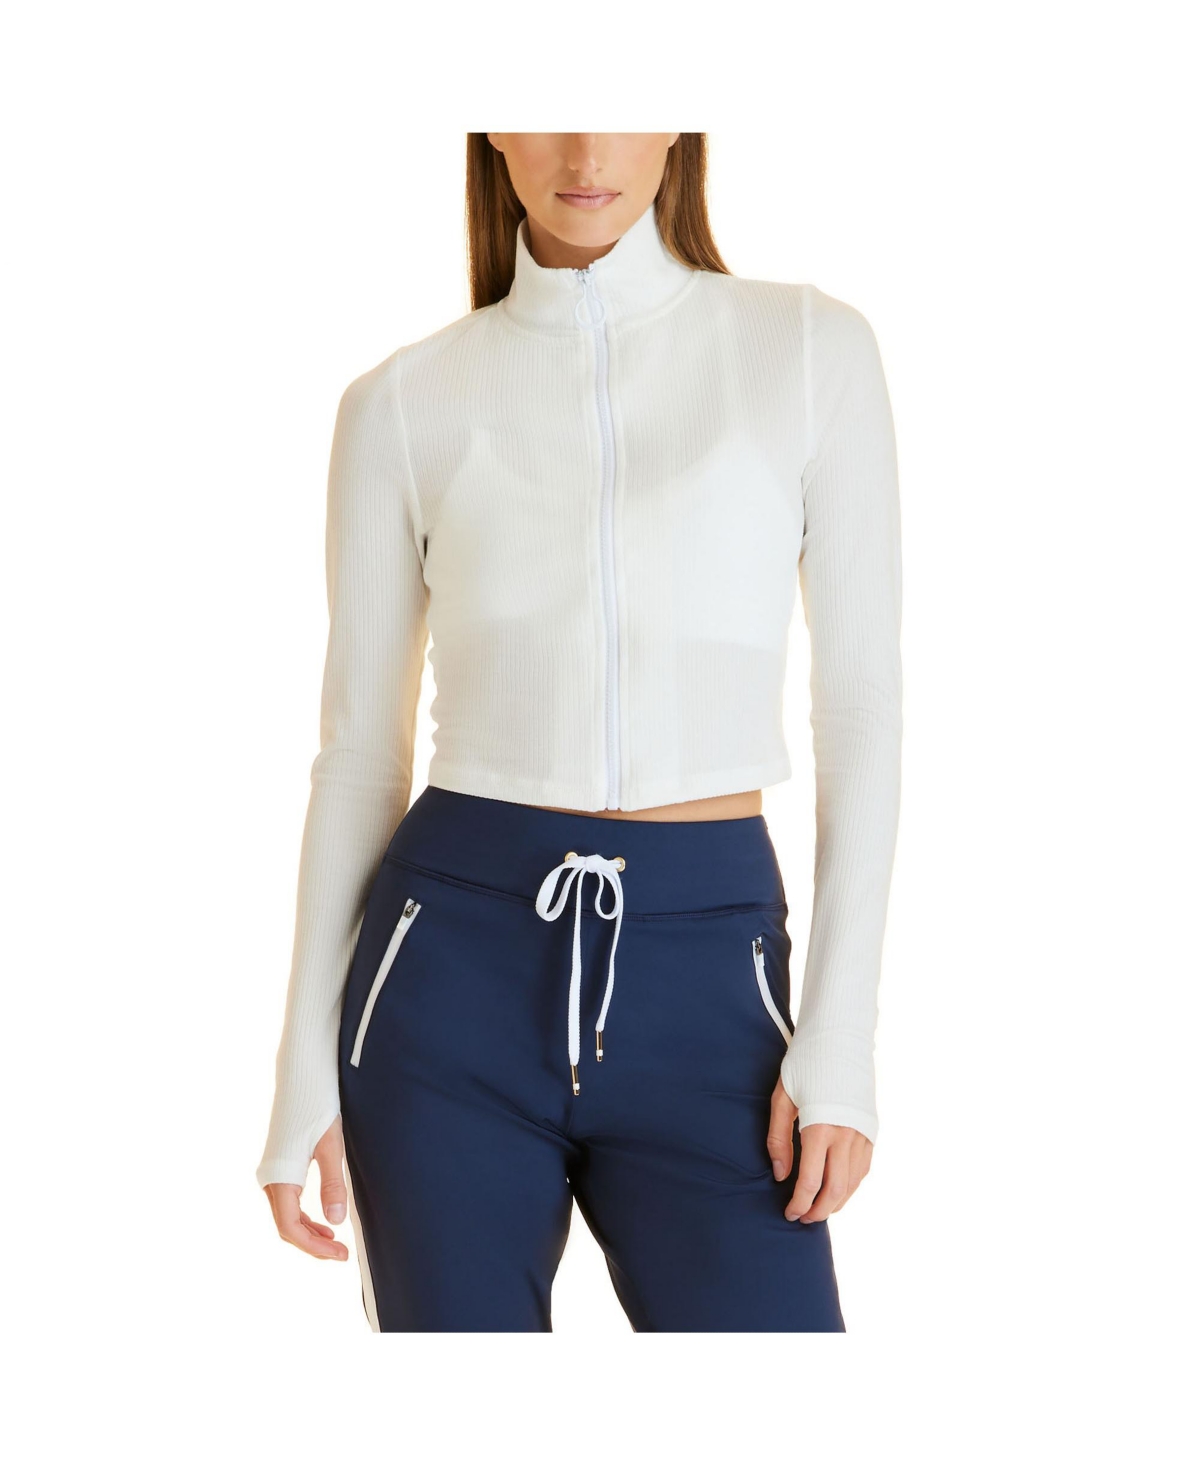 Alala Adult Women Rise Zip Up Jacket In White